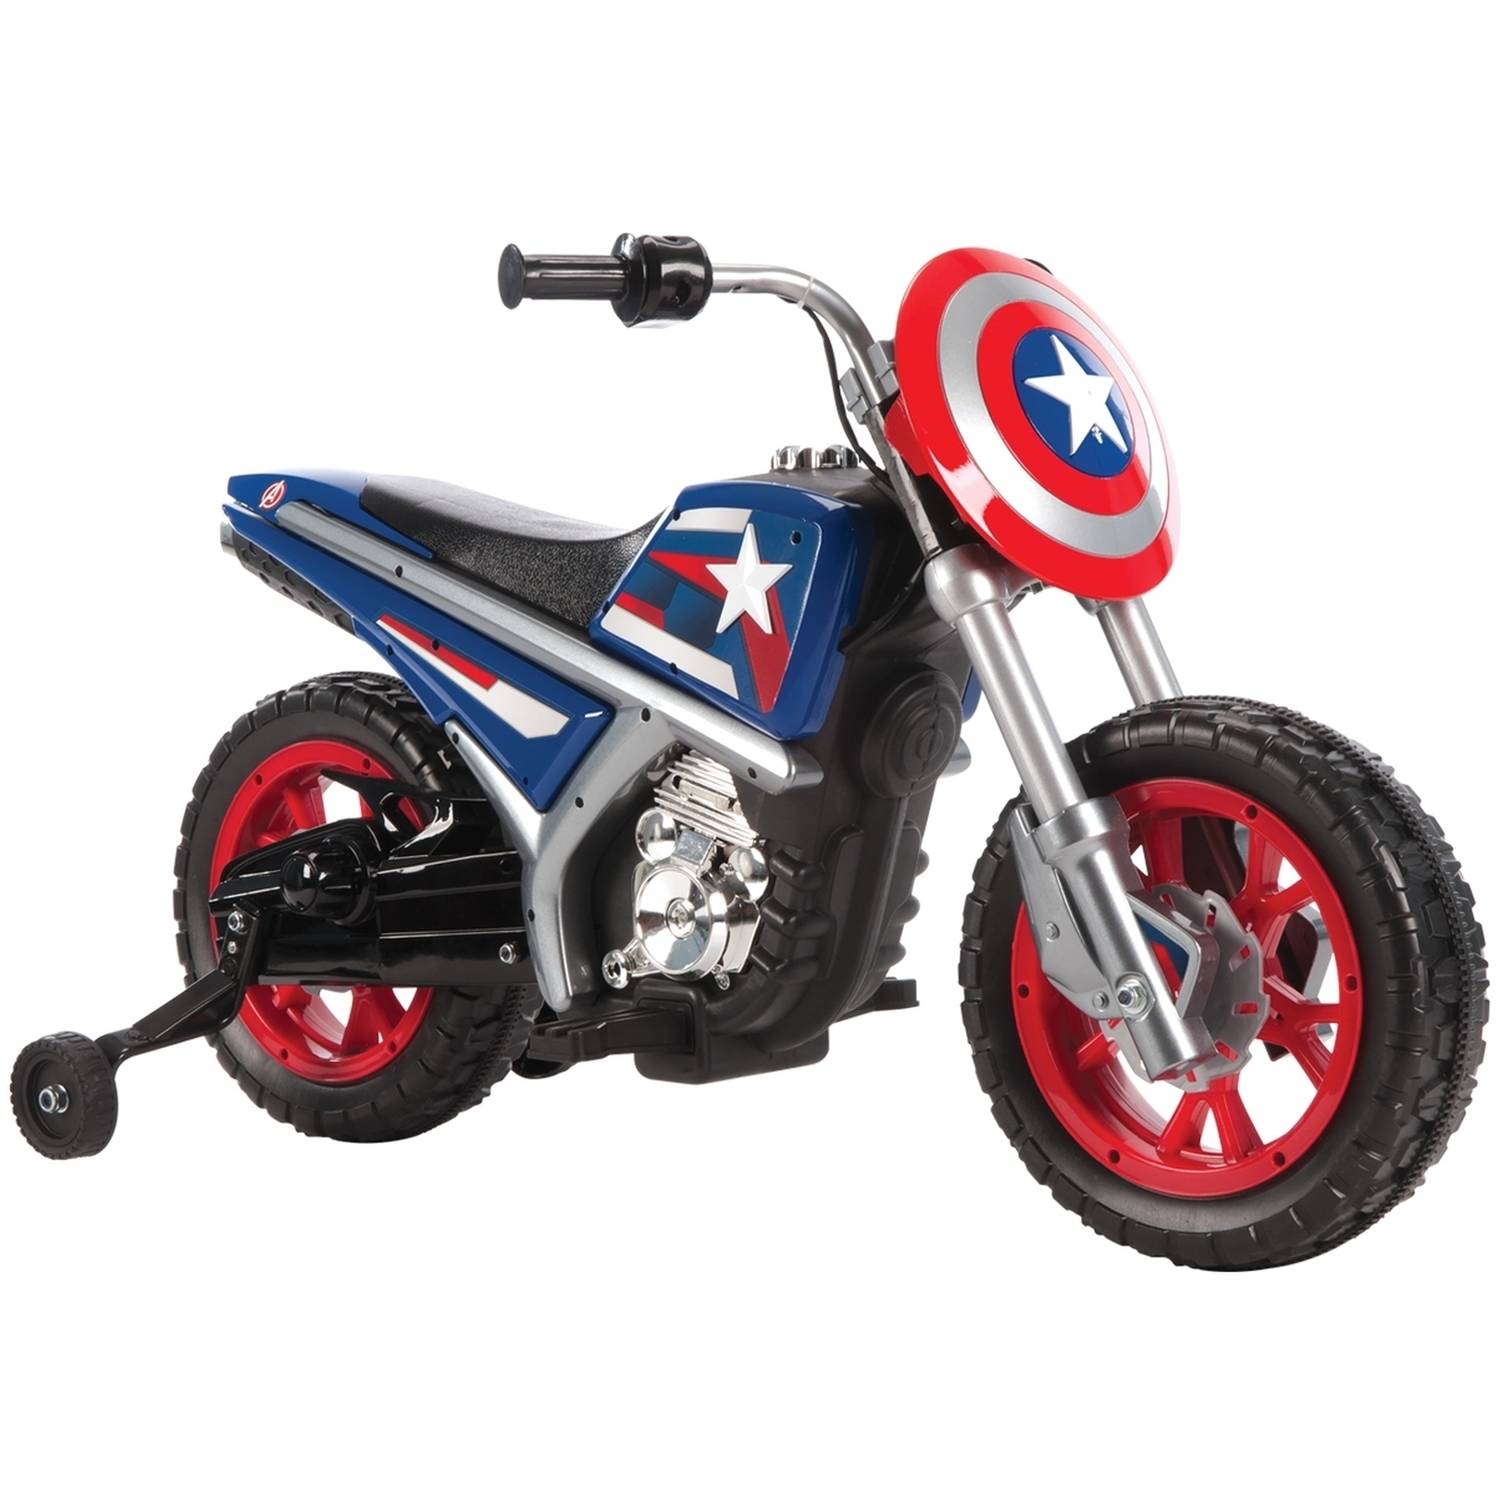 Captain America 6V Battery-Powered Ride-On Toy by Huffy - image 2 of 6